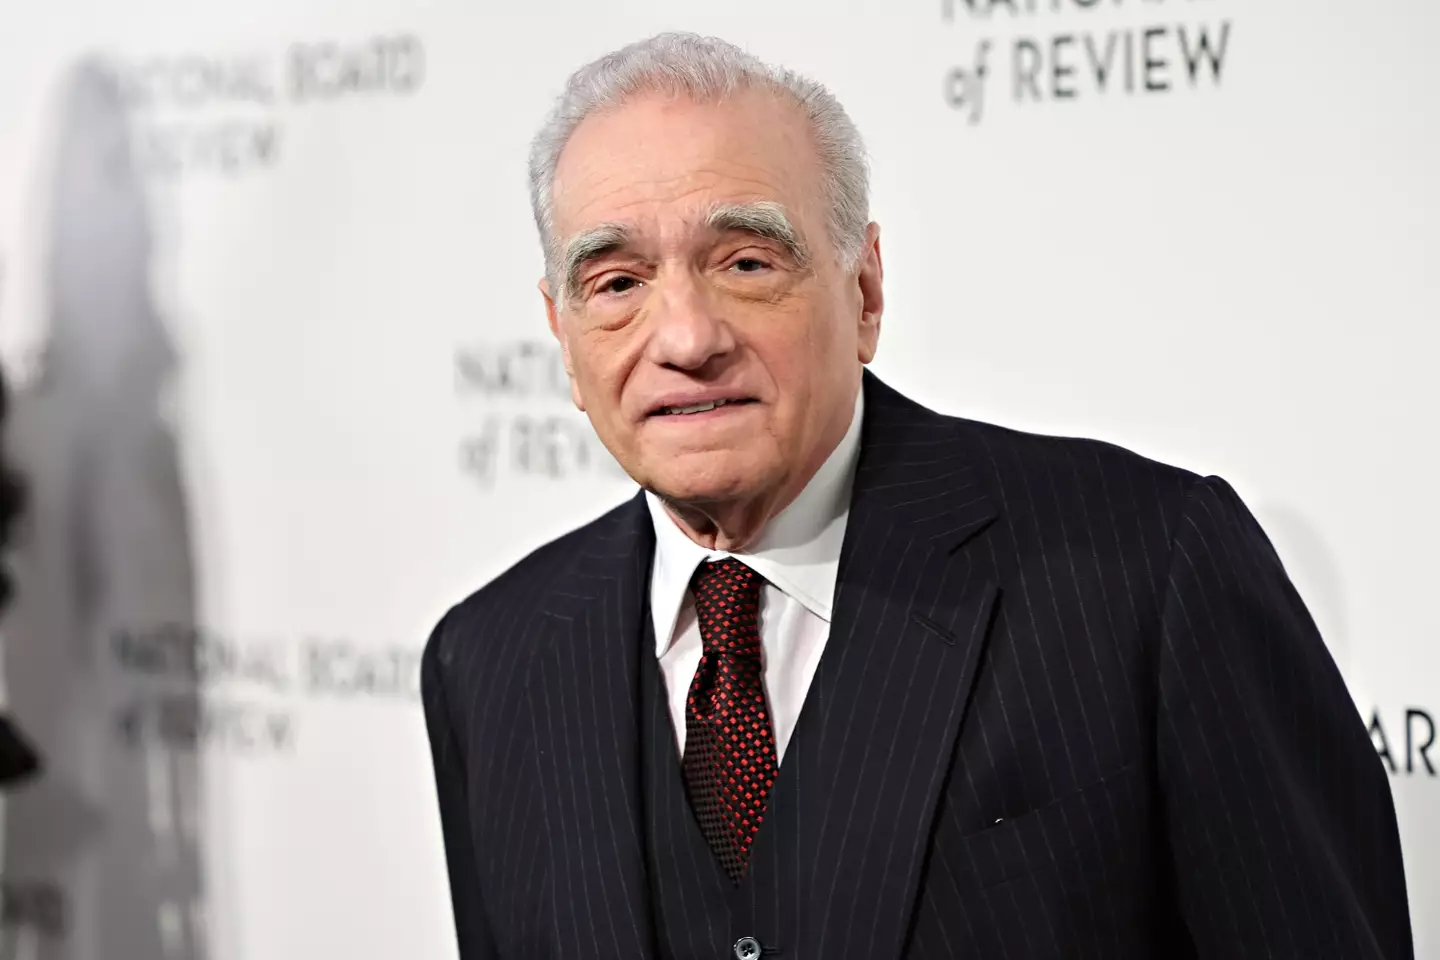 Martin Scorsese won Best Director at this year's National Board of Review Gala.